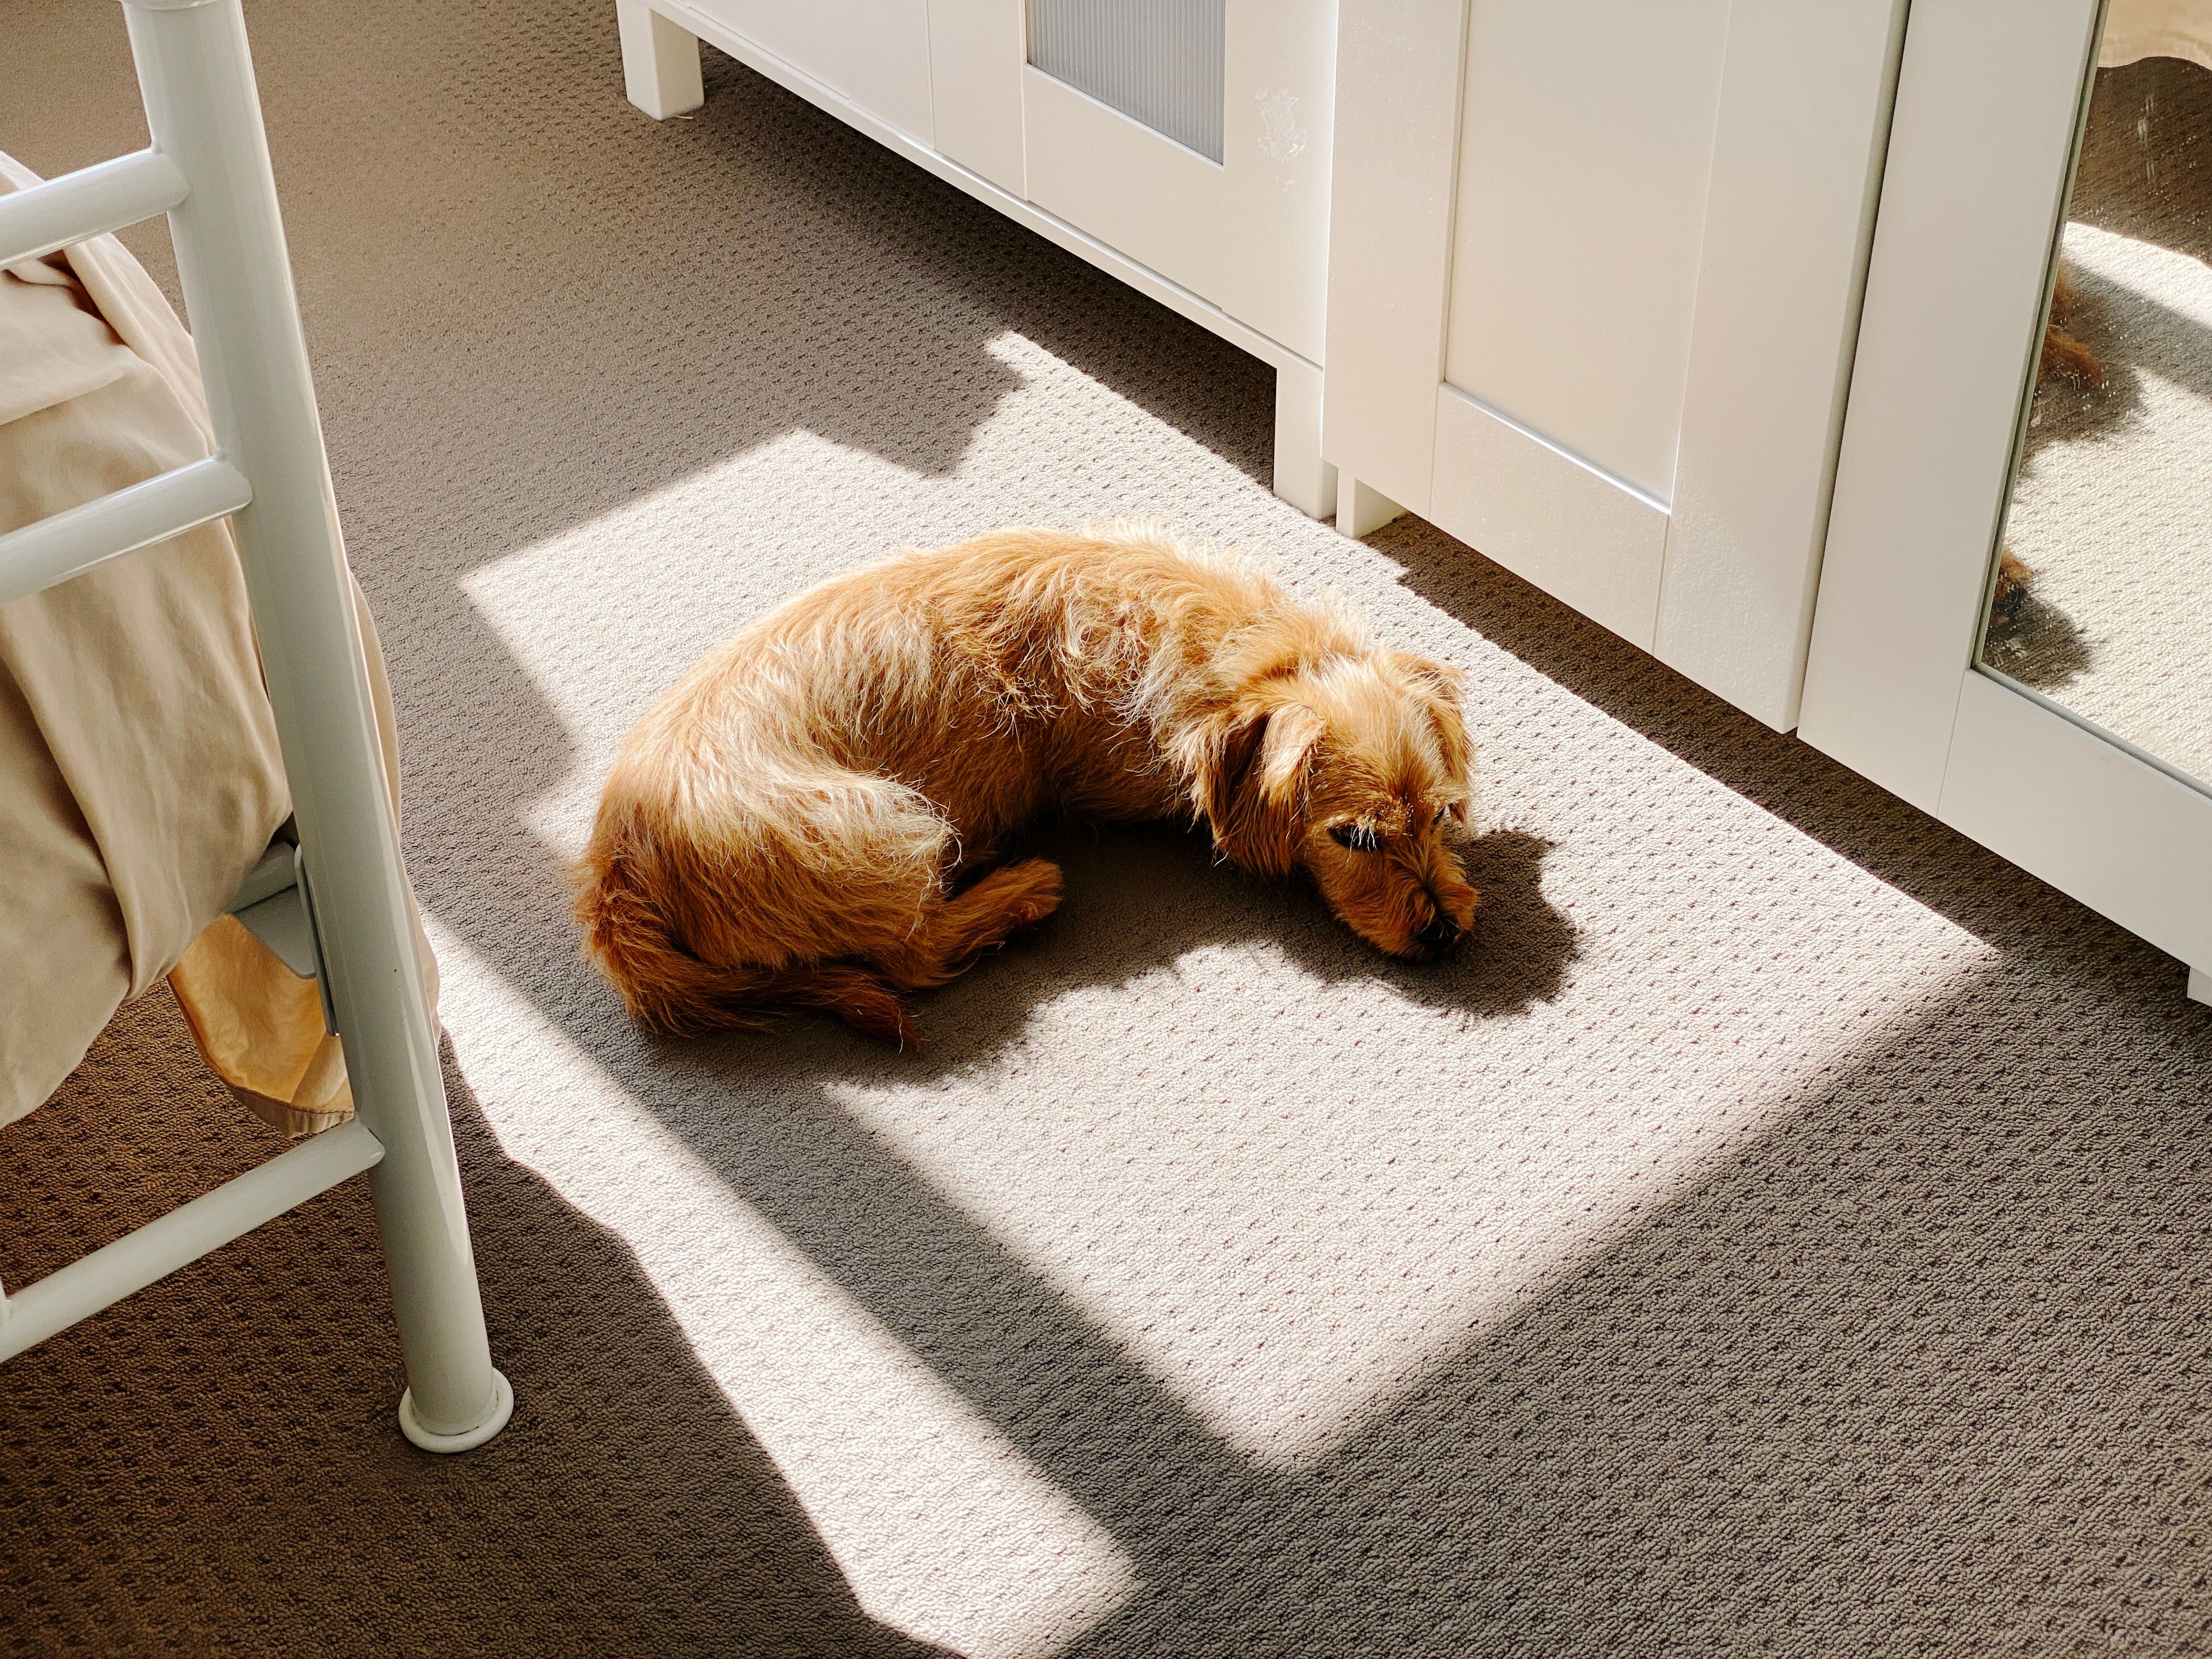 A photo of a small scruffy blonde dog lying curled up on the floor in a big patch of sunlight.